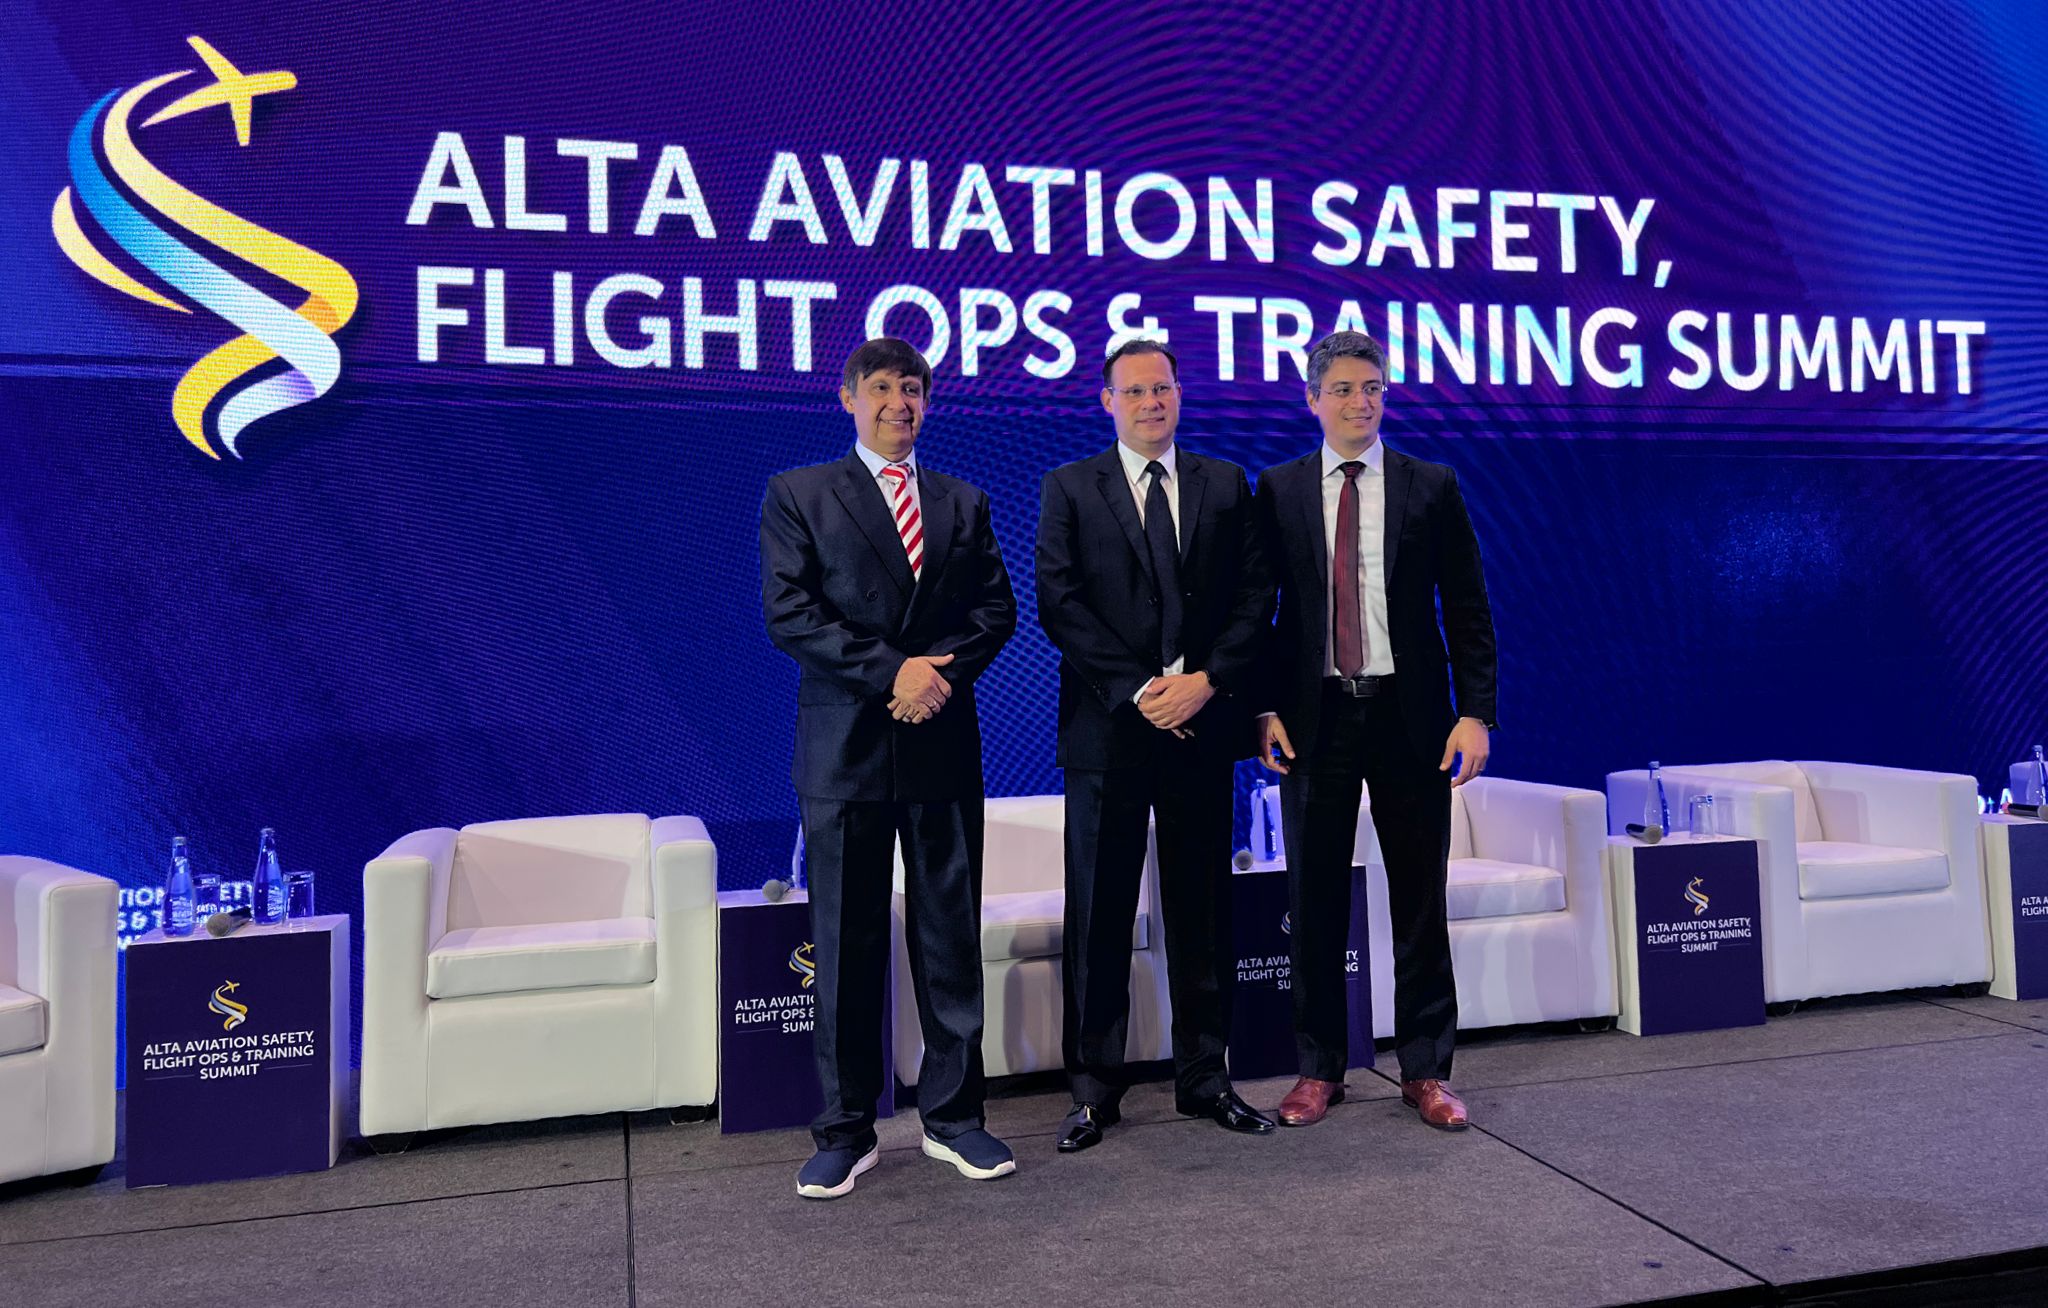 ALTA NEWS - Operational excellence: the key to making aviation the safest mode of transportation